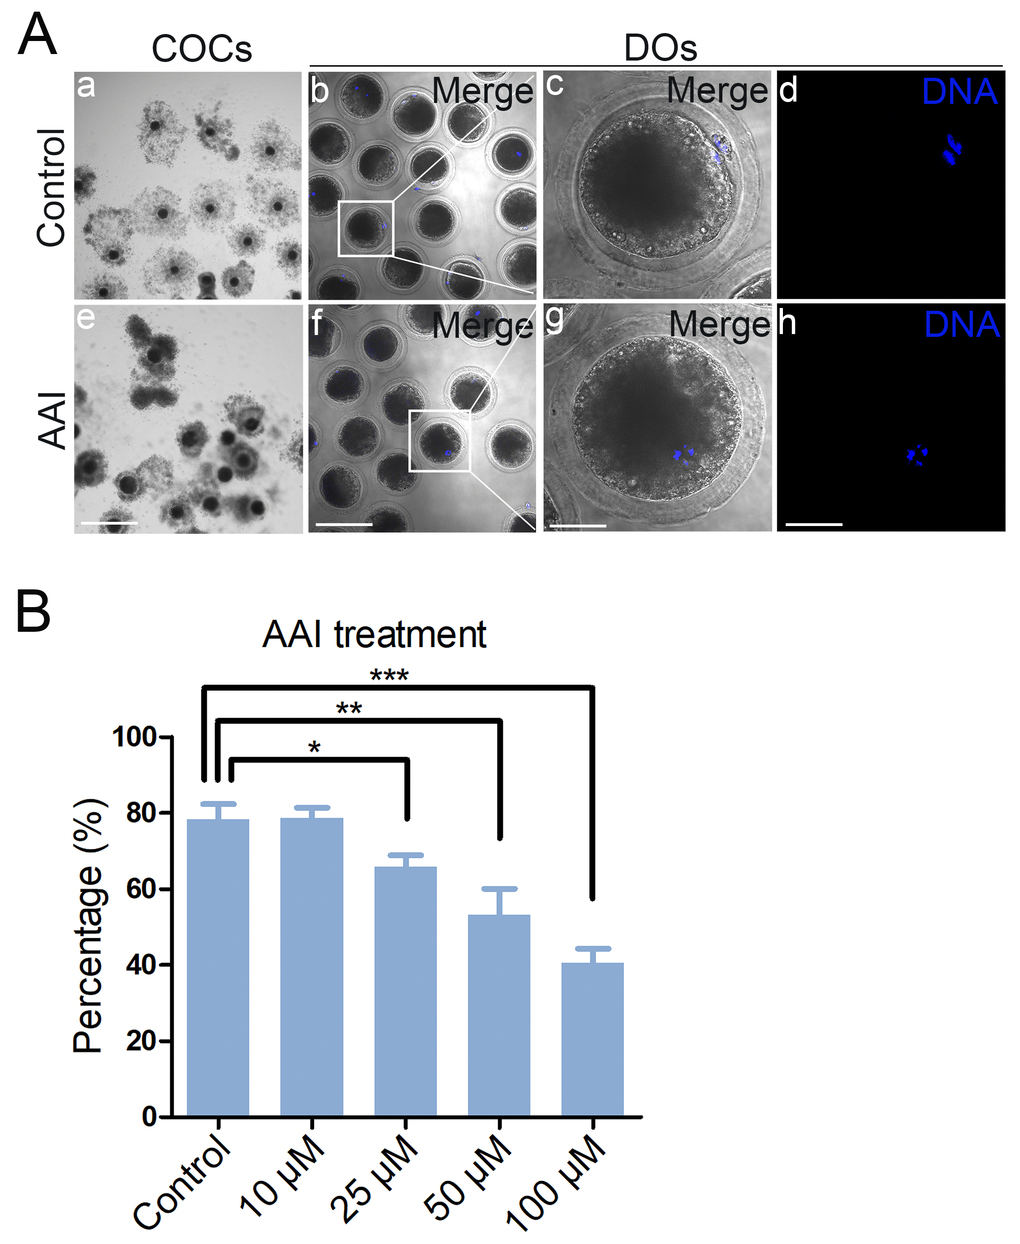 Effects of different doses of AAI on the porcine oocyte maturation. (A) Representative images of oocyte meiotic progression in control and AAI-exposed oocytes. Cumulus cell expansion of cumulus oocyte complexes (COCs) and polar body extrusion (PBE) of denuded oocytes (DOs) were imaged by the confocal microscope. Scale bar, 360 μm (a, e); 120 μm (b, f); 40 μm (c, g); 40 μm (d, h). (B) The rate of PBE was recorded in control and different concentrations of AAI-exposed groups (10 μM, 25 μM, 50 μM and 100 μM) after culture for 44 h in vitro. Data were presented as mean percentage (mean ± SEM) of at least three independent experiments. *P 